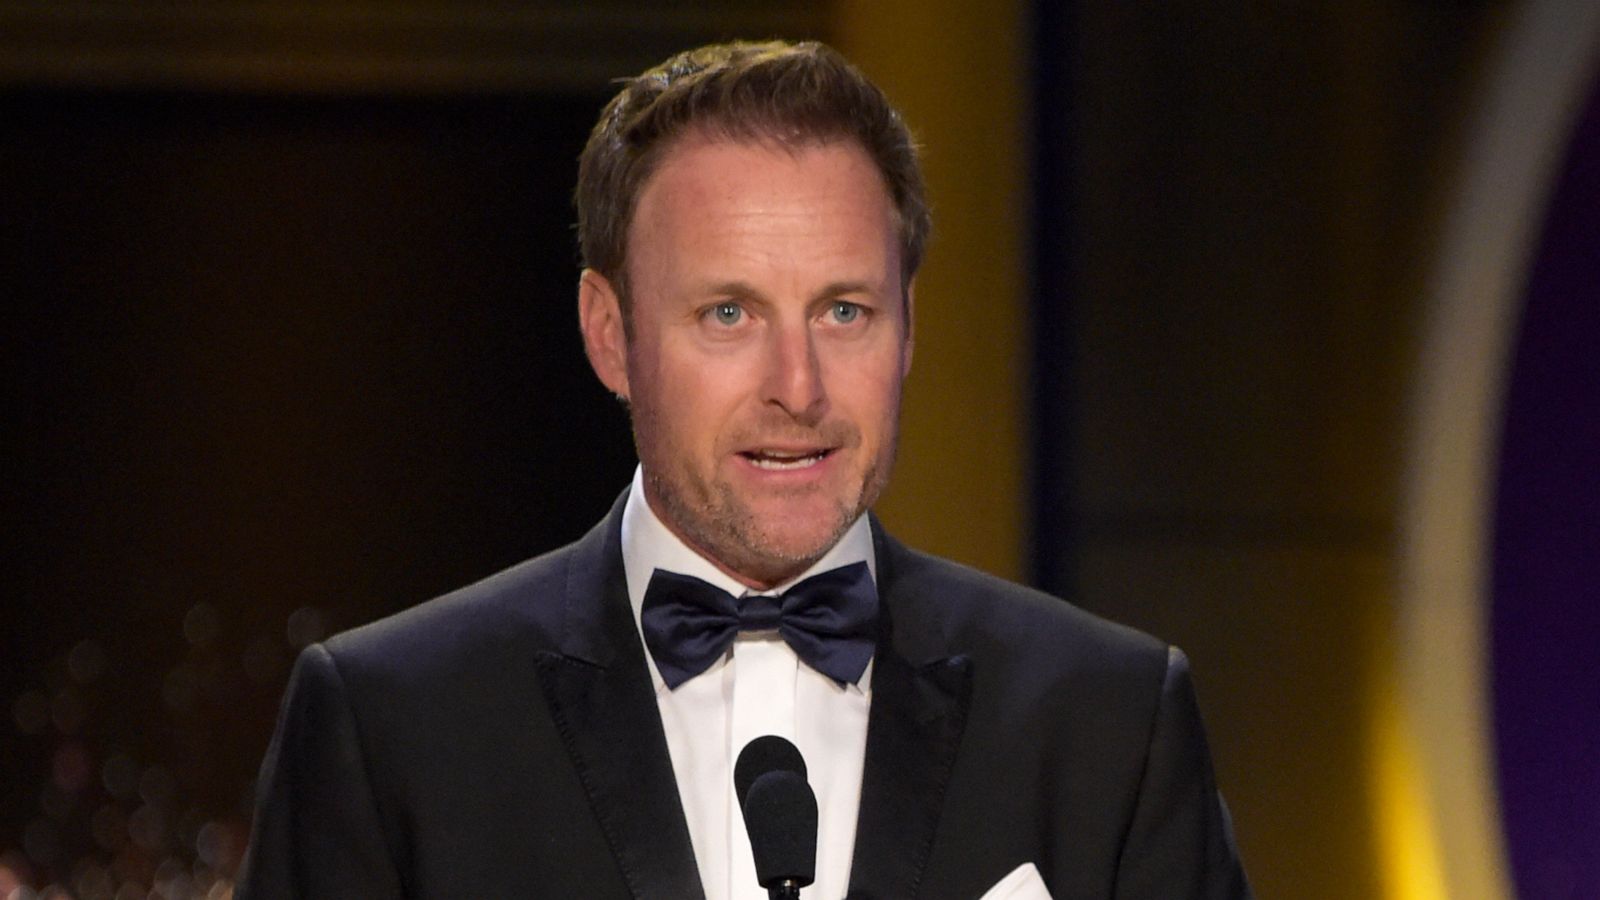 In this April 29, 2018, file photo, Chris Harrison presents the award for outstanding entertainment talk show host at the Daytime Emmy Awards at the Pasadena Civic Center in Pasadena, Calif. (Photo by Richard Shotwell/Invision/AP, File)